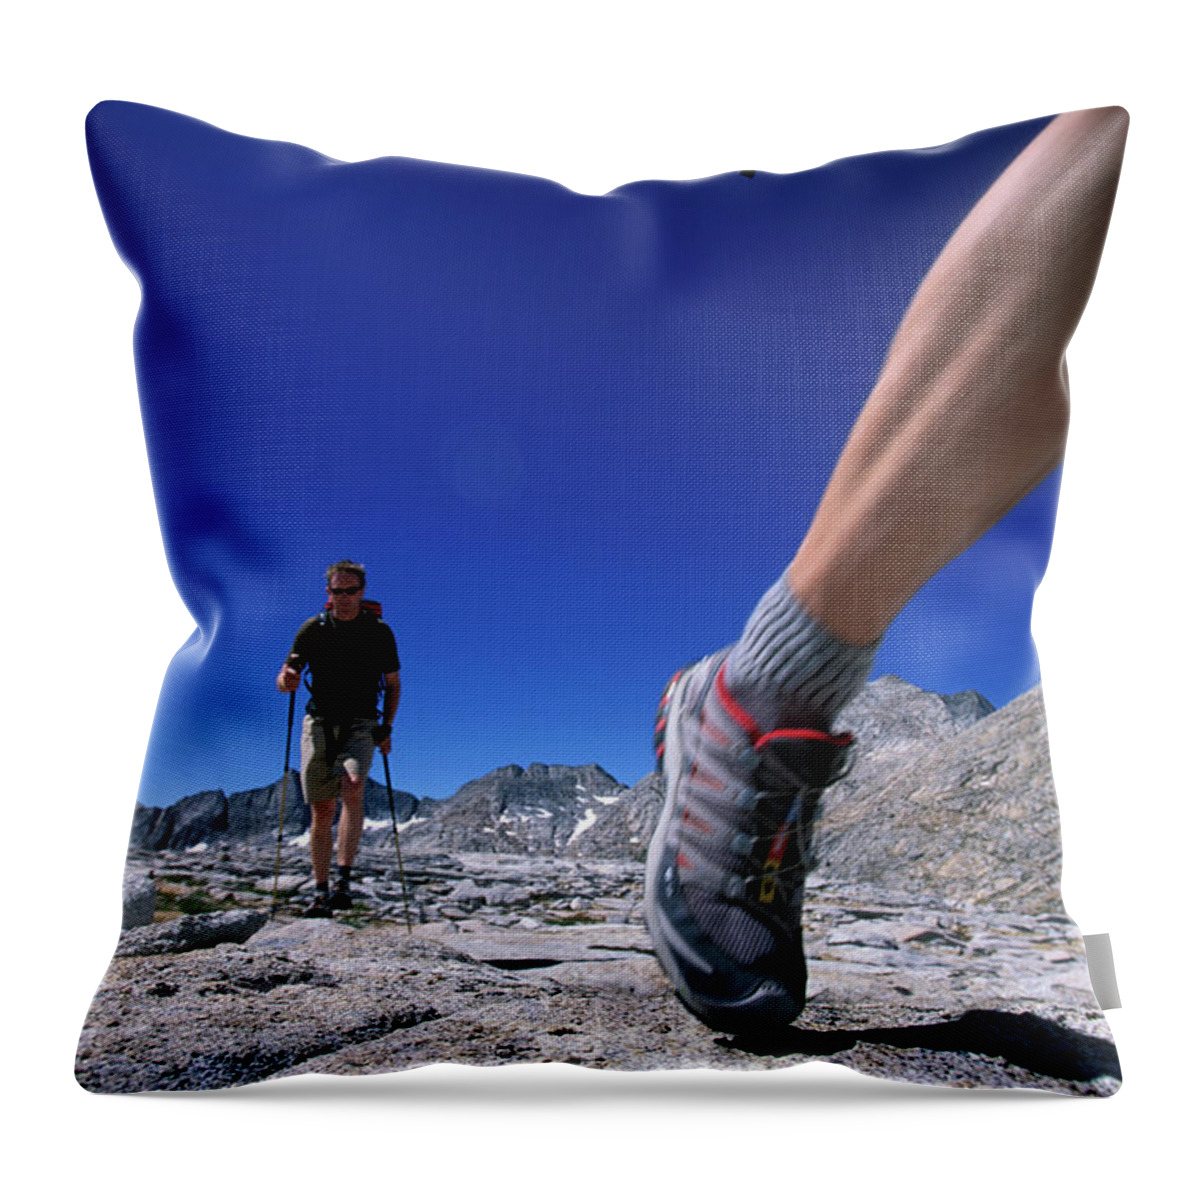 Adult Throw Pillow featuring the photograph Feet With Trail Running Shoes Hiking by Corey Rich